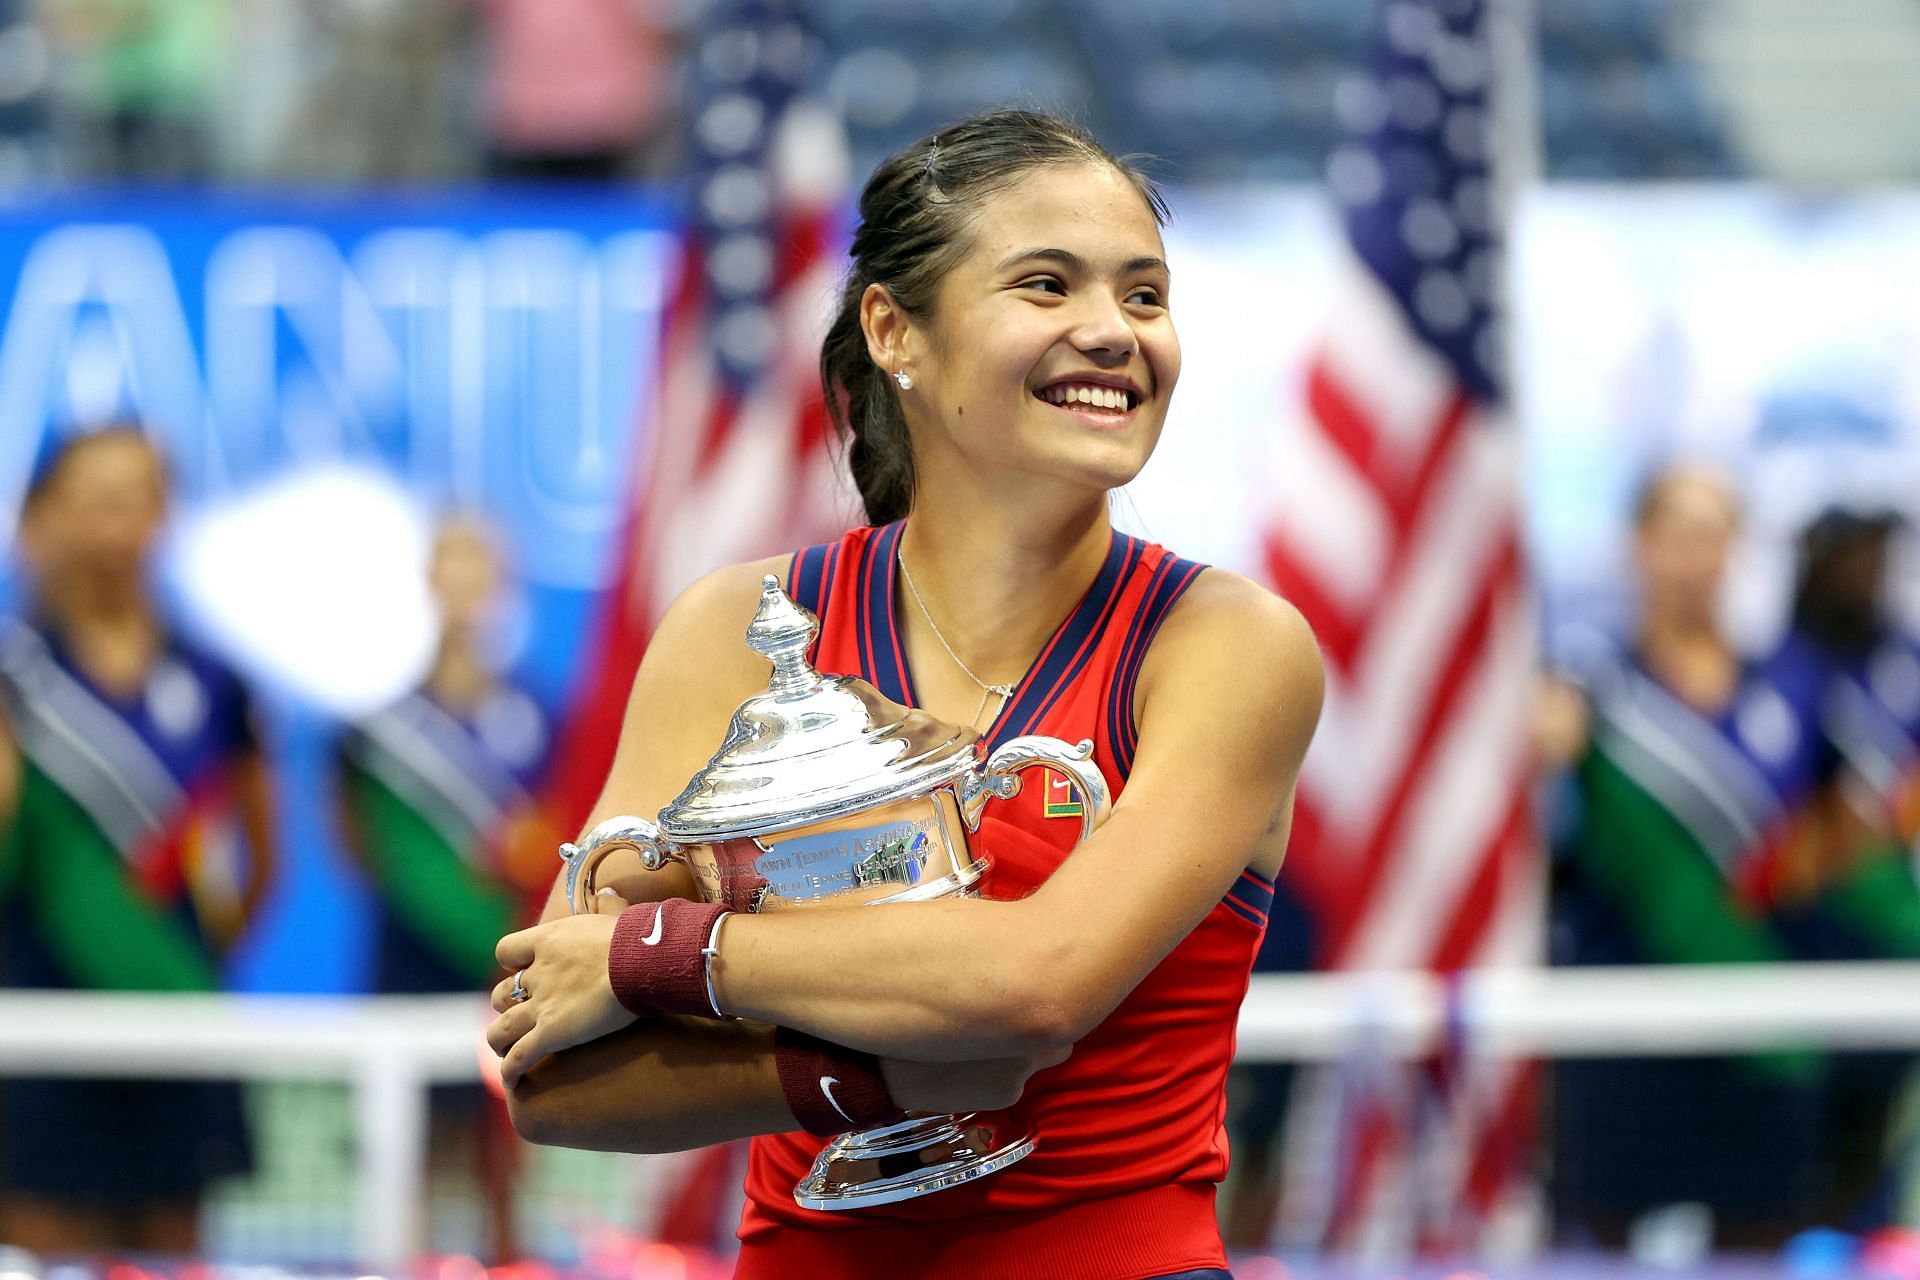 Emma Raducanu with the US Open trophy